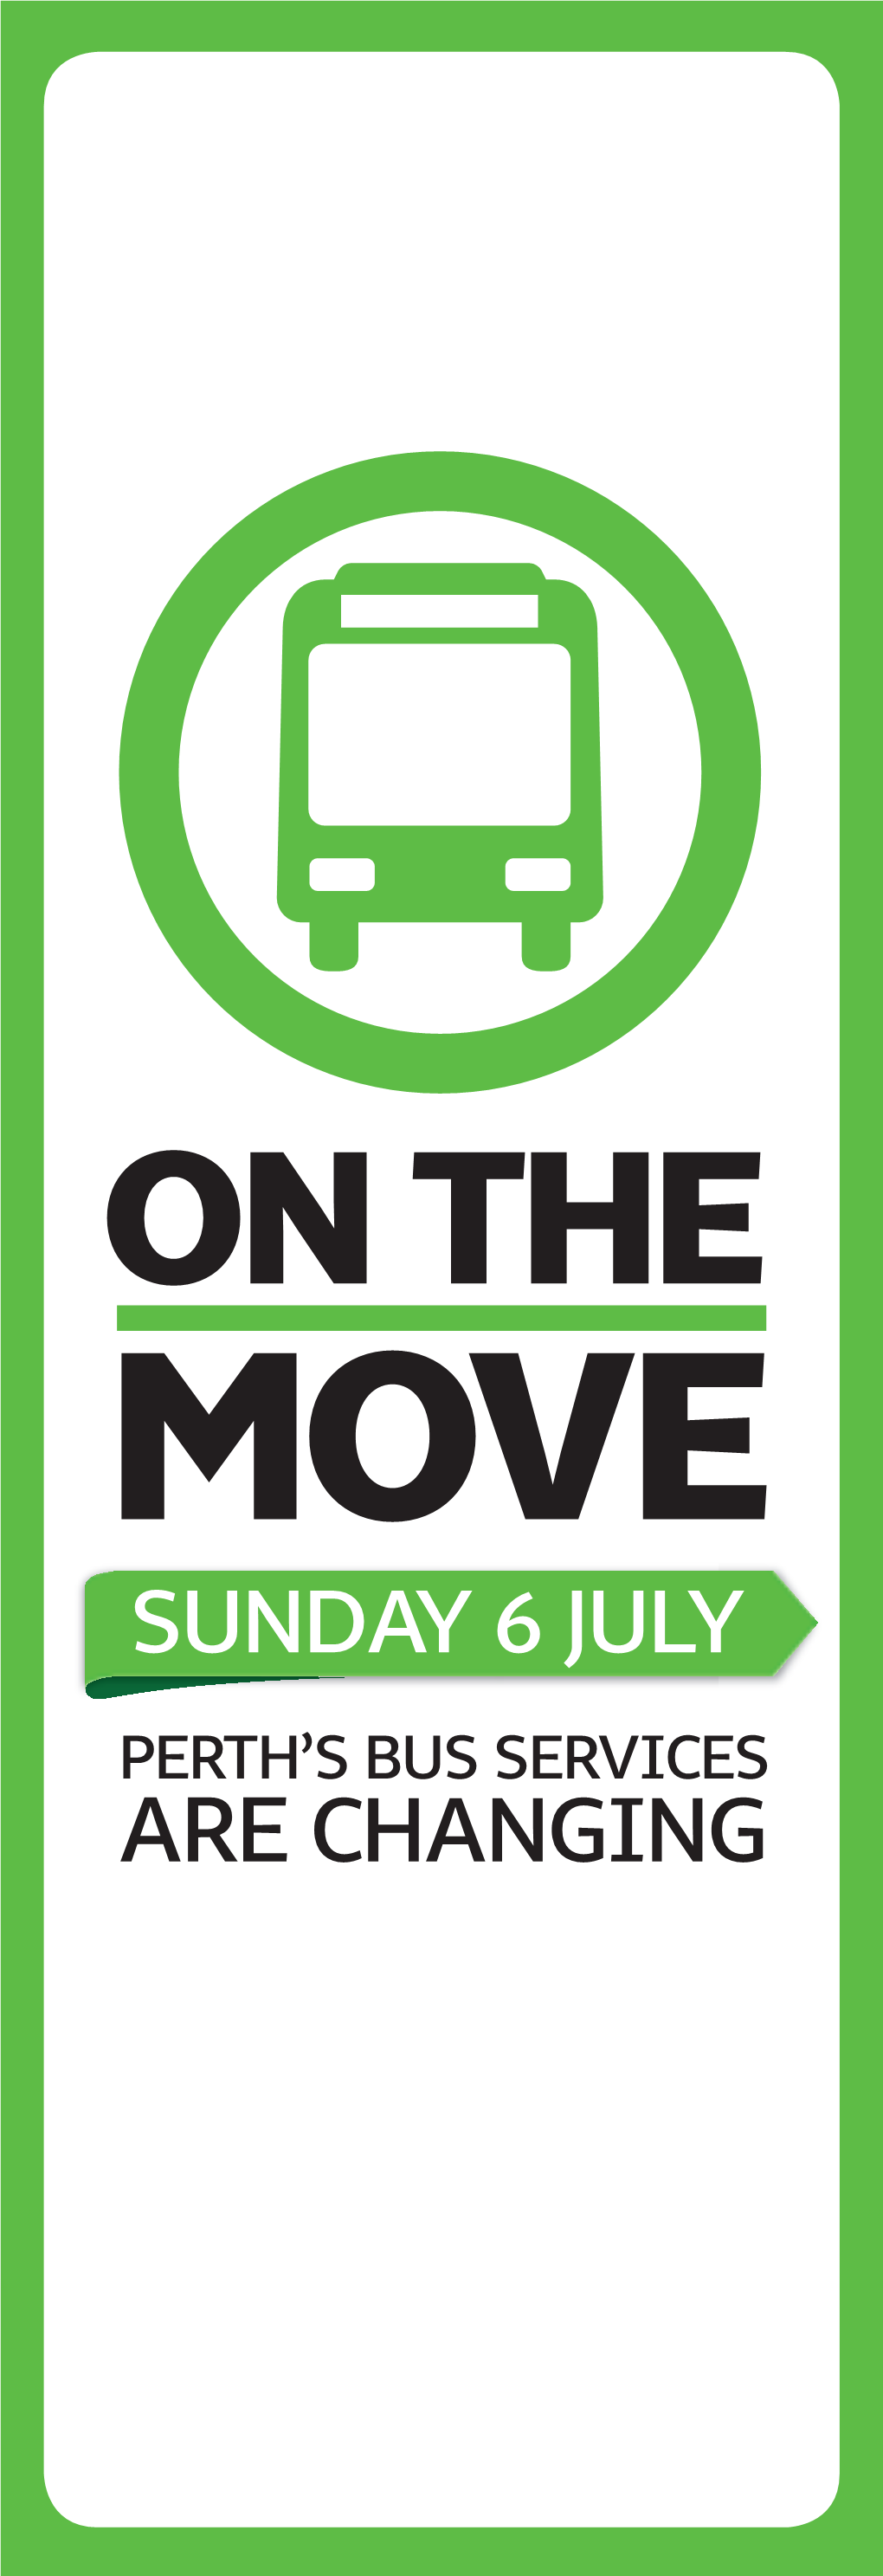 SUNDAY 6 JULY Routes 30, 31, 34, 102, 107, 220, 881 and 940 Will Run from Wellington Street Bus Station